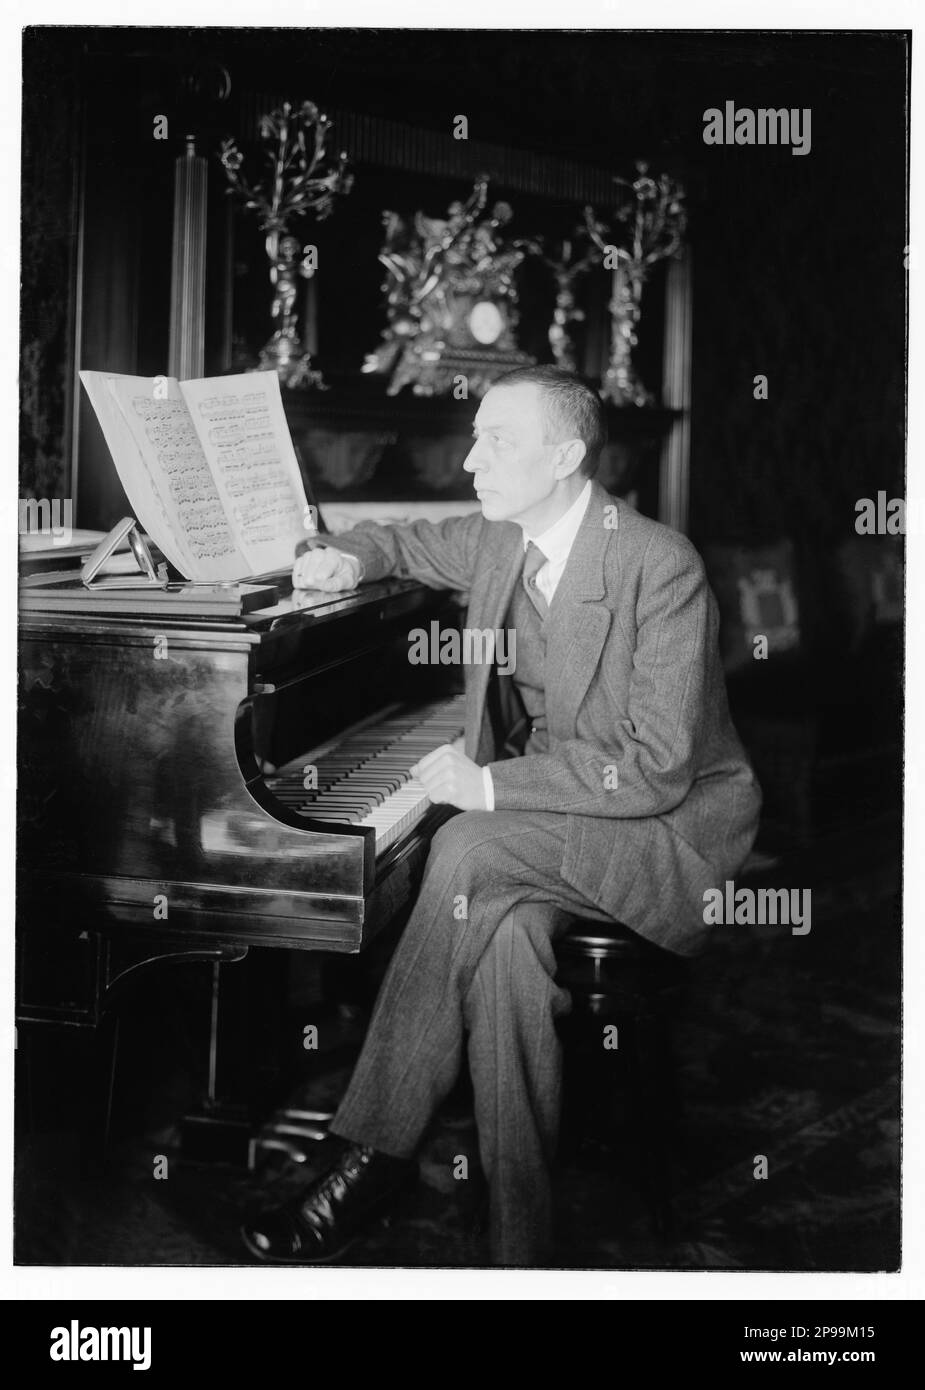 1921 , New York , USA : The russian music composer  and pianist SERGEI RACHMANINOFF ( Sergej Vasil'evic Rahmaninov - Sergej Vasilyevich Rachmaninov ) (Velikij Novgorod, Russia 1873 – Beverly Hills, USA 1943 ) . He had great success with the Opera ALEKO , four piano concertos and many others works . He was one of the greatest pianist of his time . Photograph by Bain , New York - PIANISTA - COMPOSITORE - OPERA LIRICA - CLASSICA - CLASSICAL - PORTRAIT - RITRATTO - MUSICISTA - MUSICA   - pianoforte - piano - CRAVATTA - TIE - profilo - profile  -- ARCHIVIO GBB Stock Photo